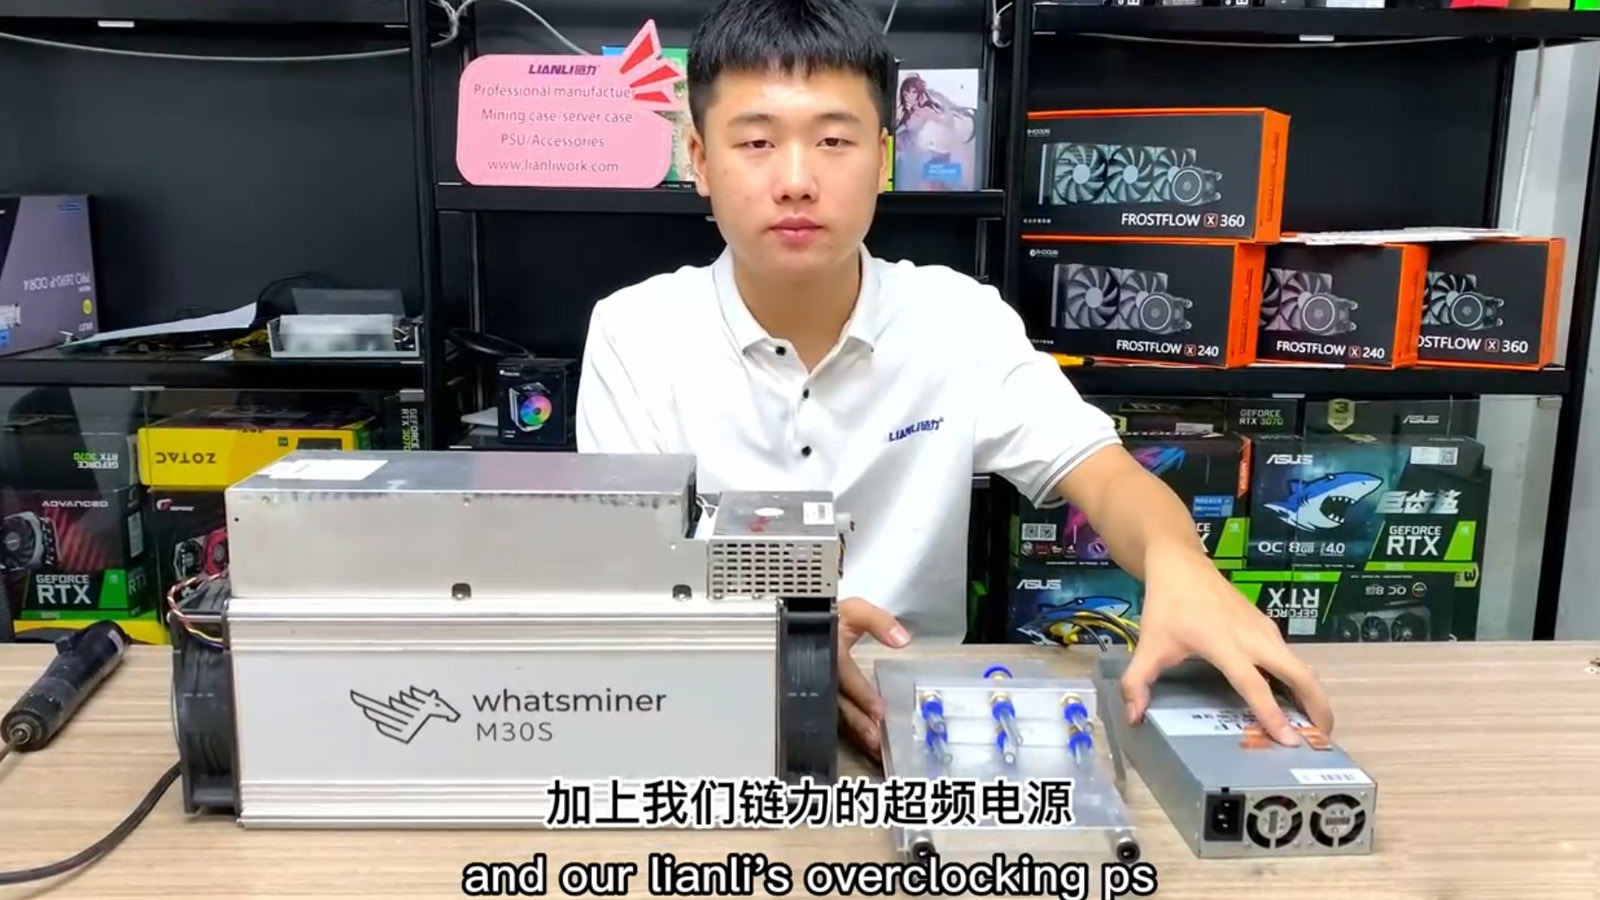 Whatsminer M30s modified water cooling overclocking system